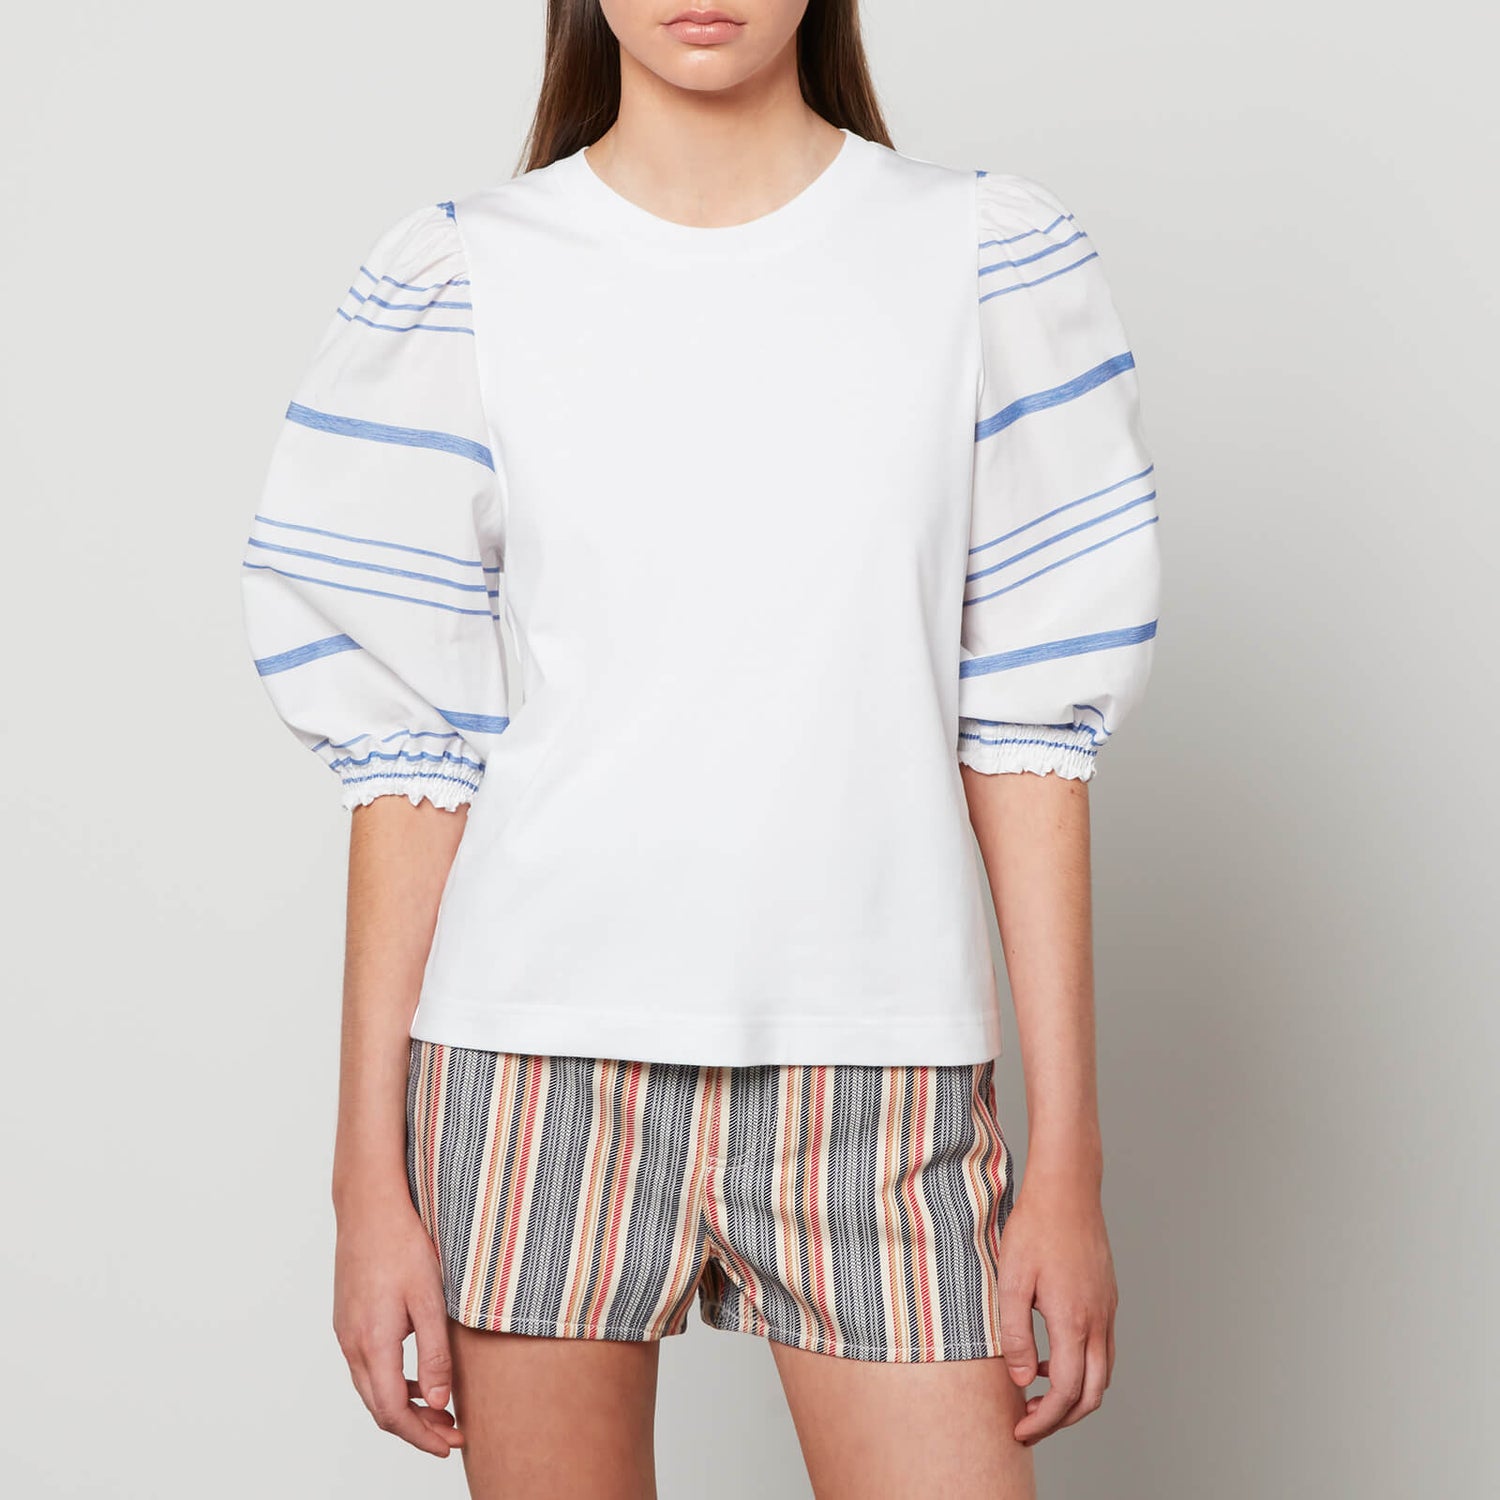 See By Chloé Women's Embellished Tees On Cotton Jersey Top - White - EU 34/UK 6